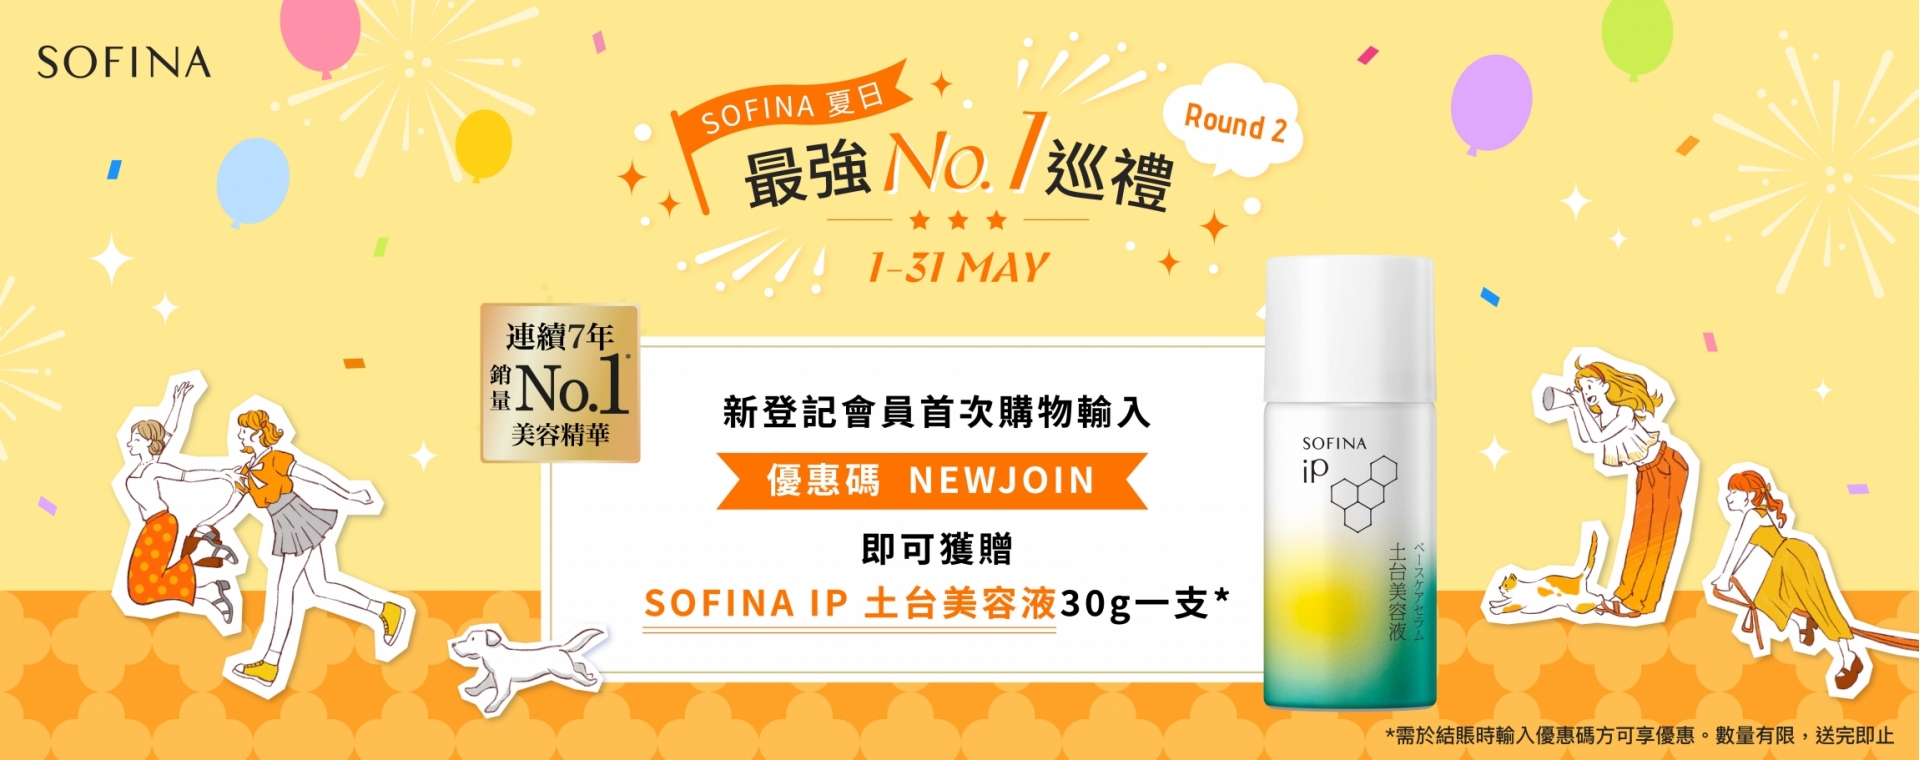 Sofina24_023_eShop_Promotion_Online_Banner_May_aw05_1920x760_5